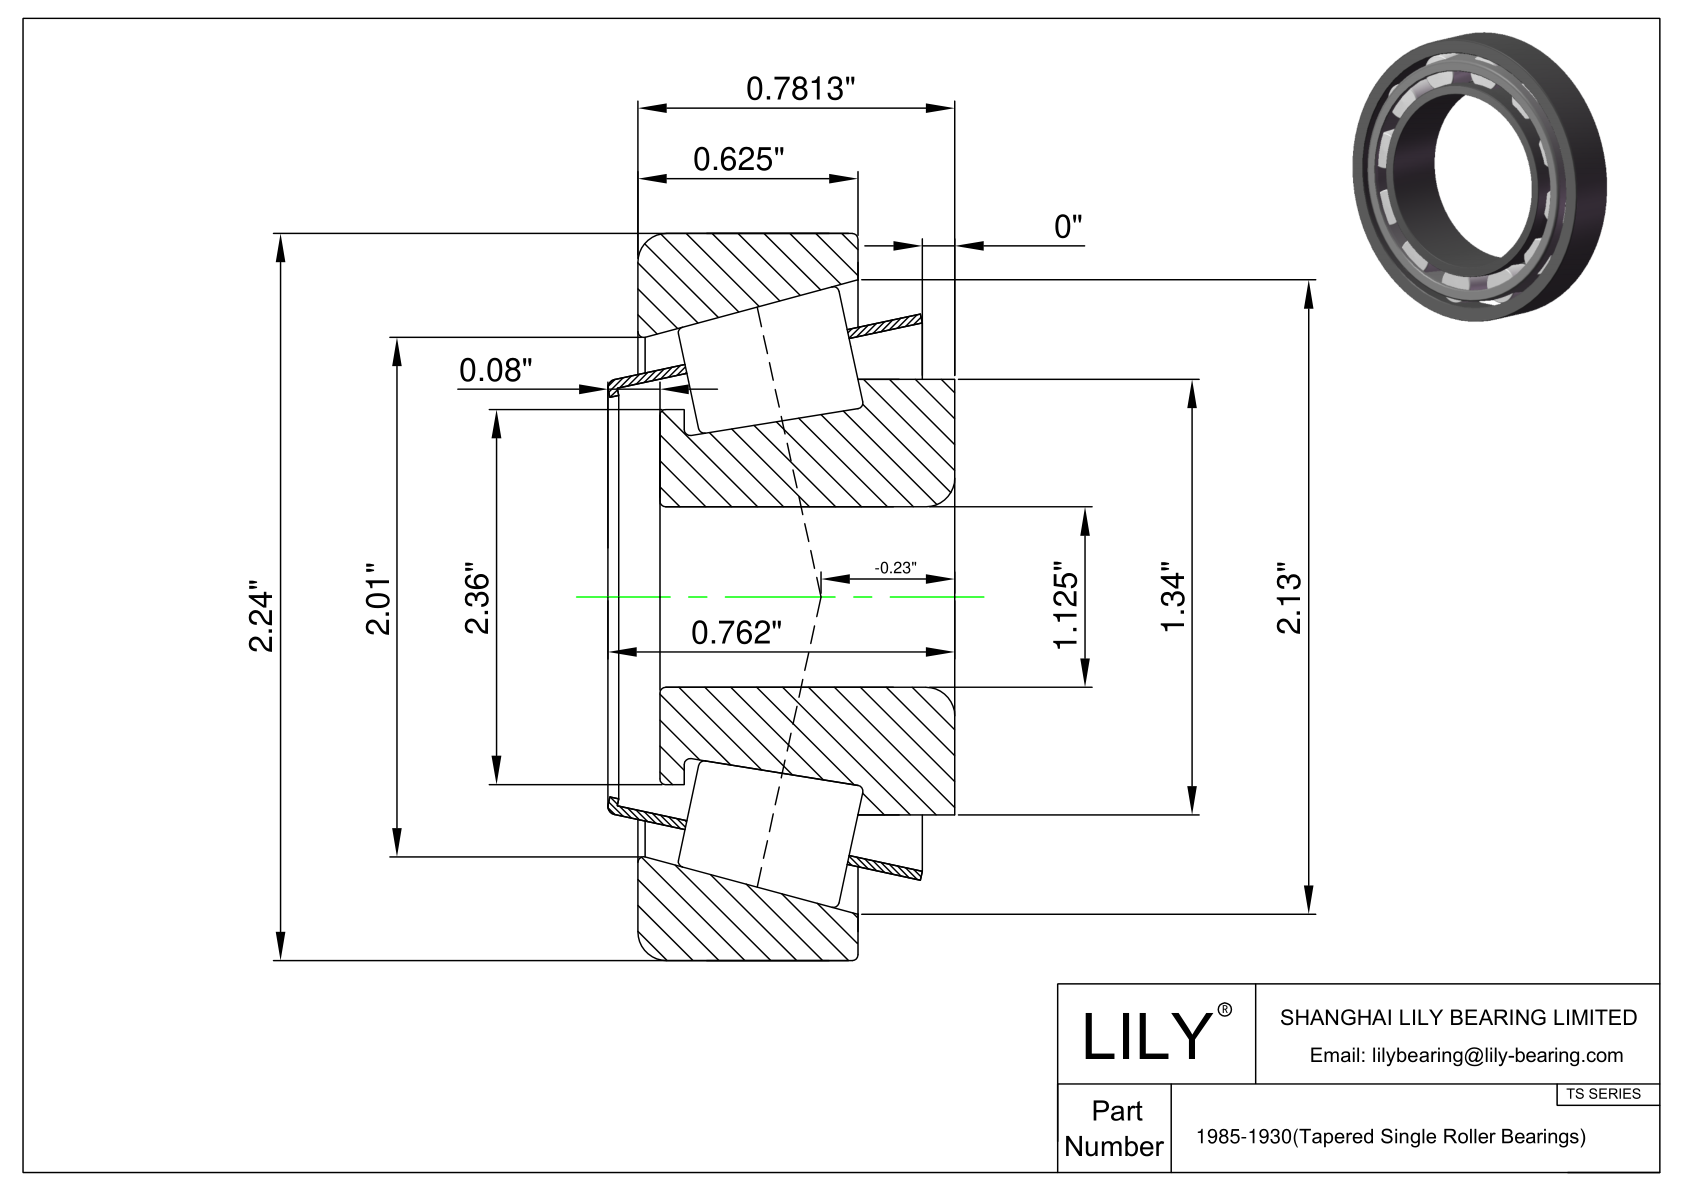 1985-1930 TS (Tapered Single Roller Bearings) (Imperial) cad drawing